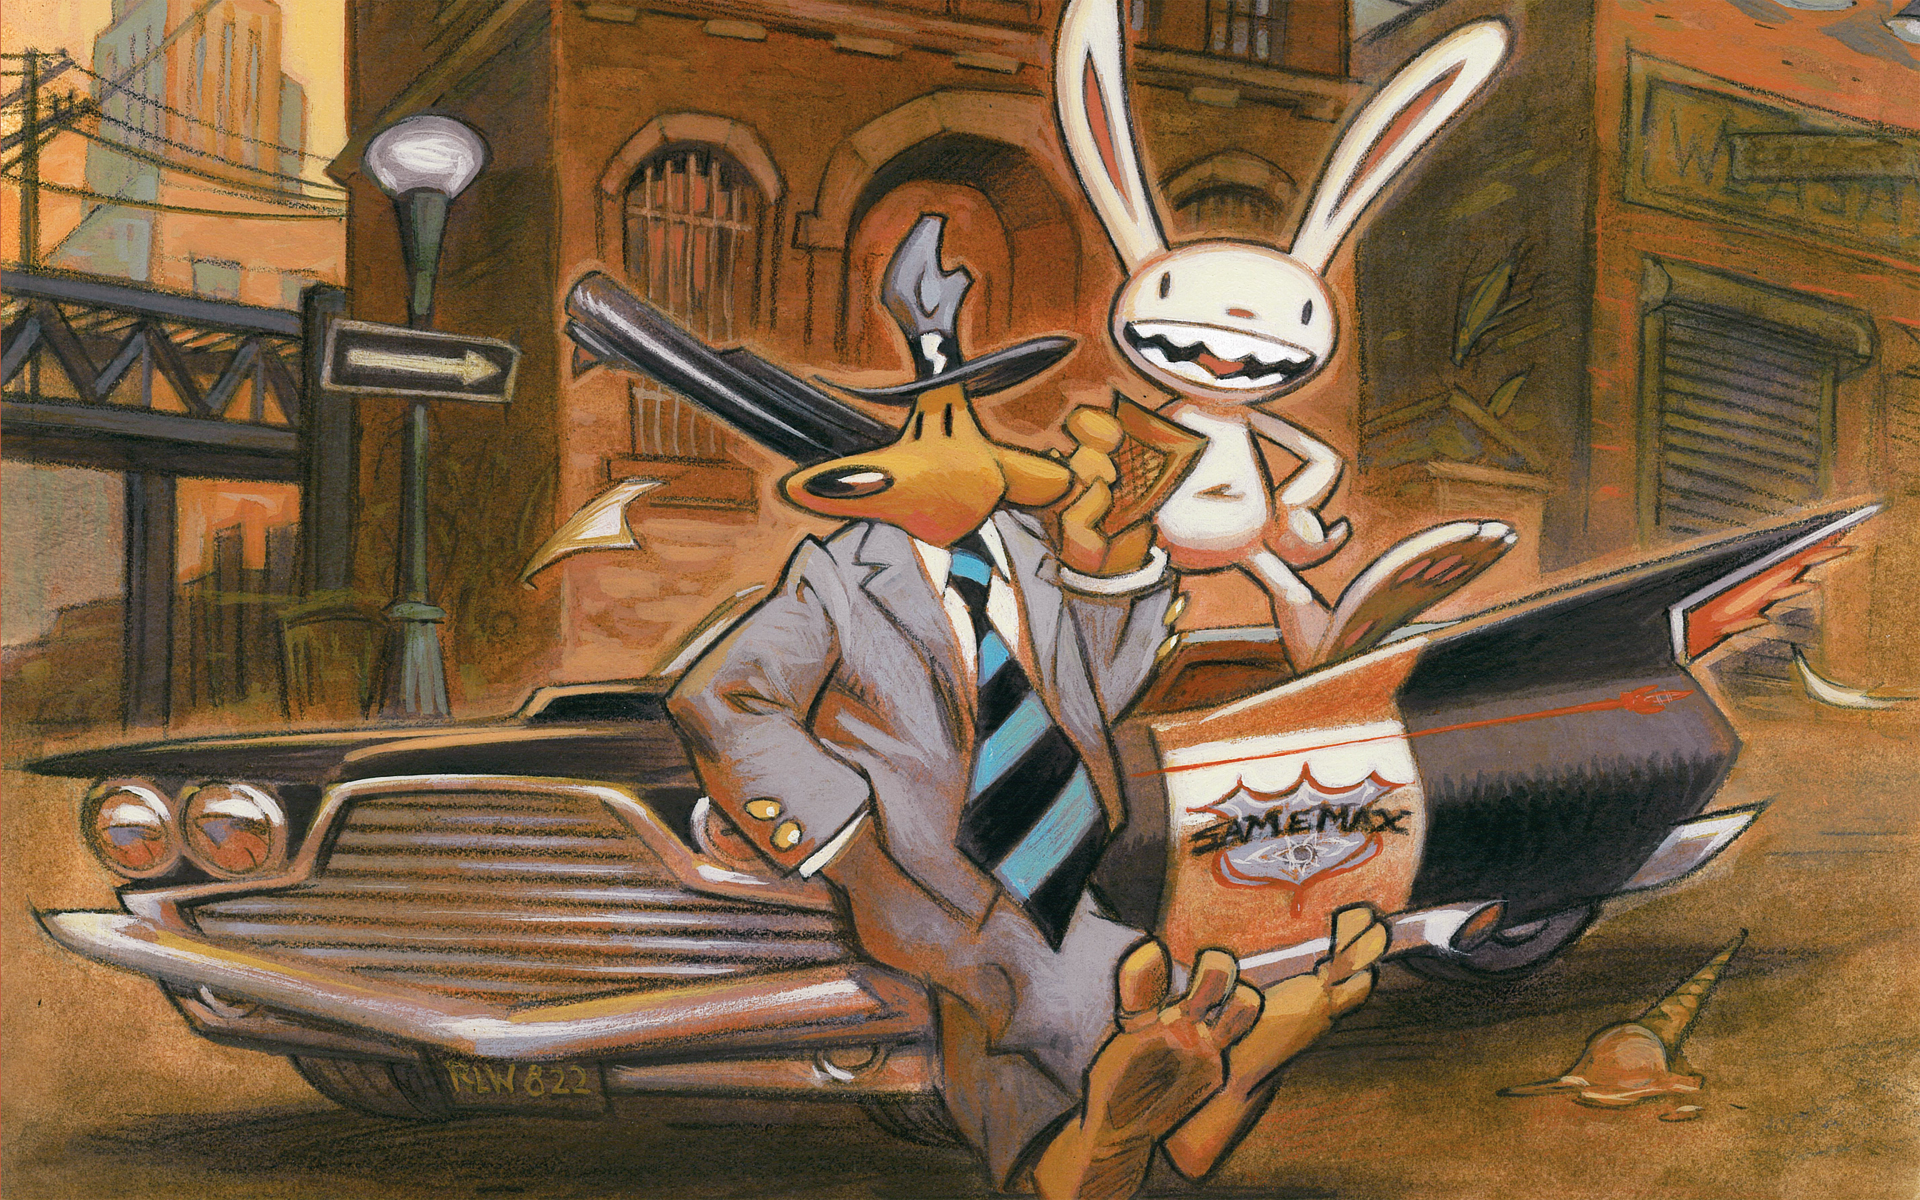 HQ Sam And Max Wallpapers | File 2665.39Kb